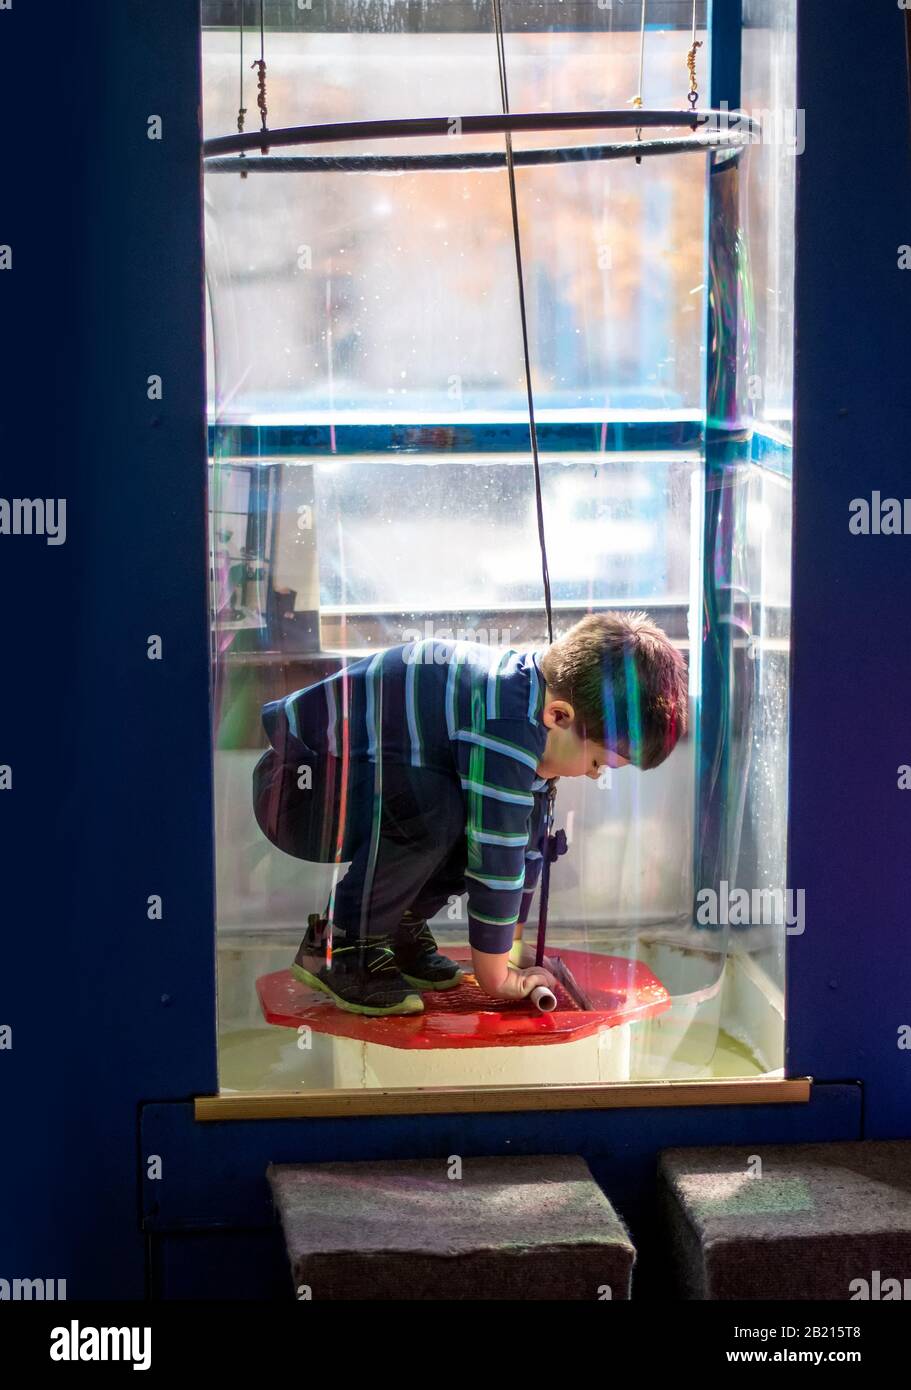 A young boy stands on a platform INSIDE a giant soap bubble, creating a science experiment at this Children s museum Stock Photo